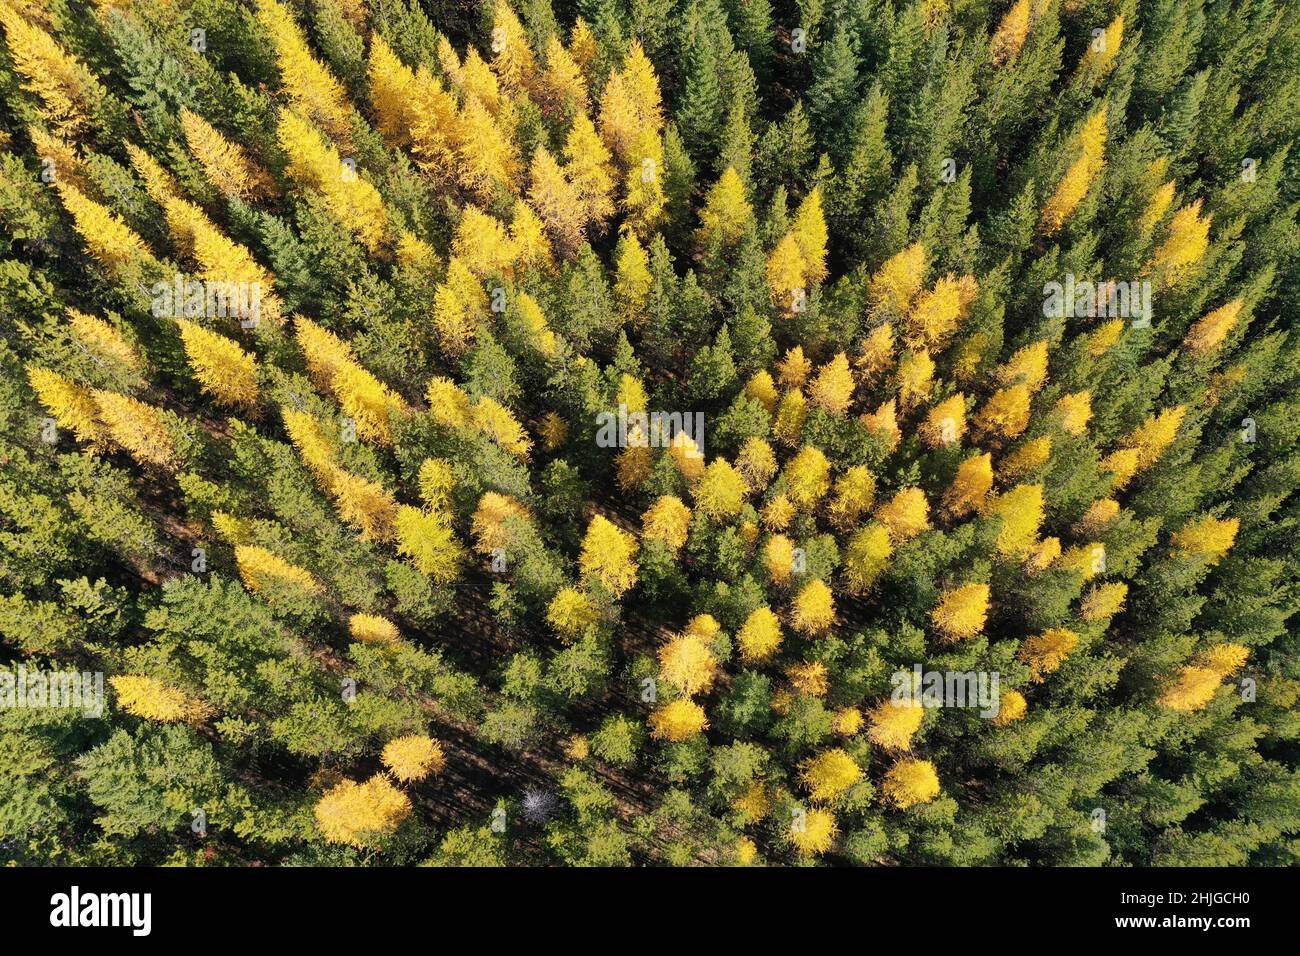 Aerial view of a mixed conifer forest with western larch in fall colors. Kootenai National Forest, MT. (Photo by Randy Beacham) Stock Photo